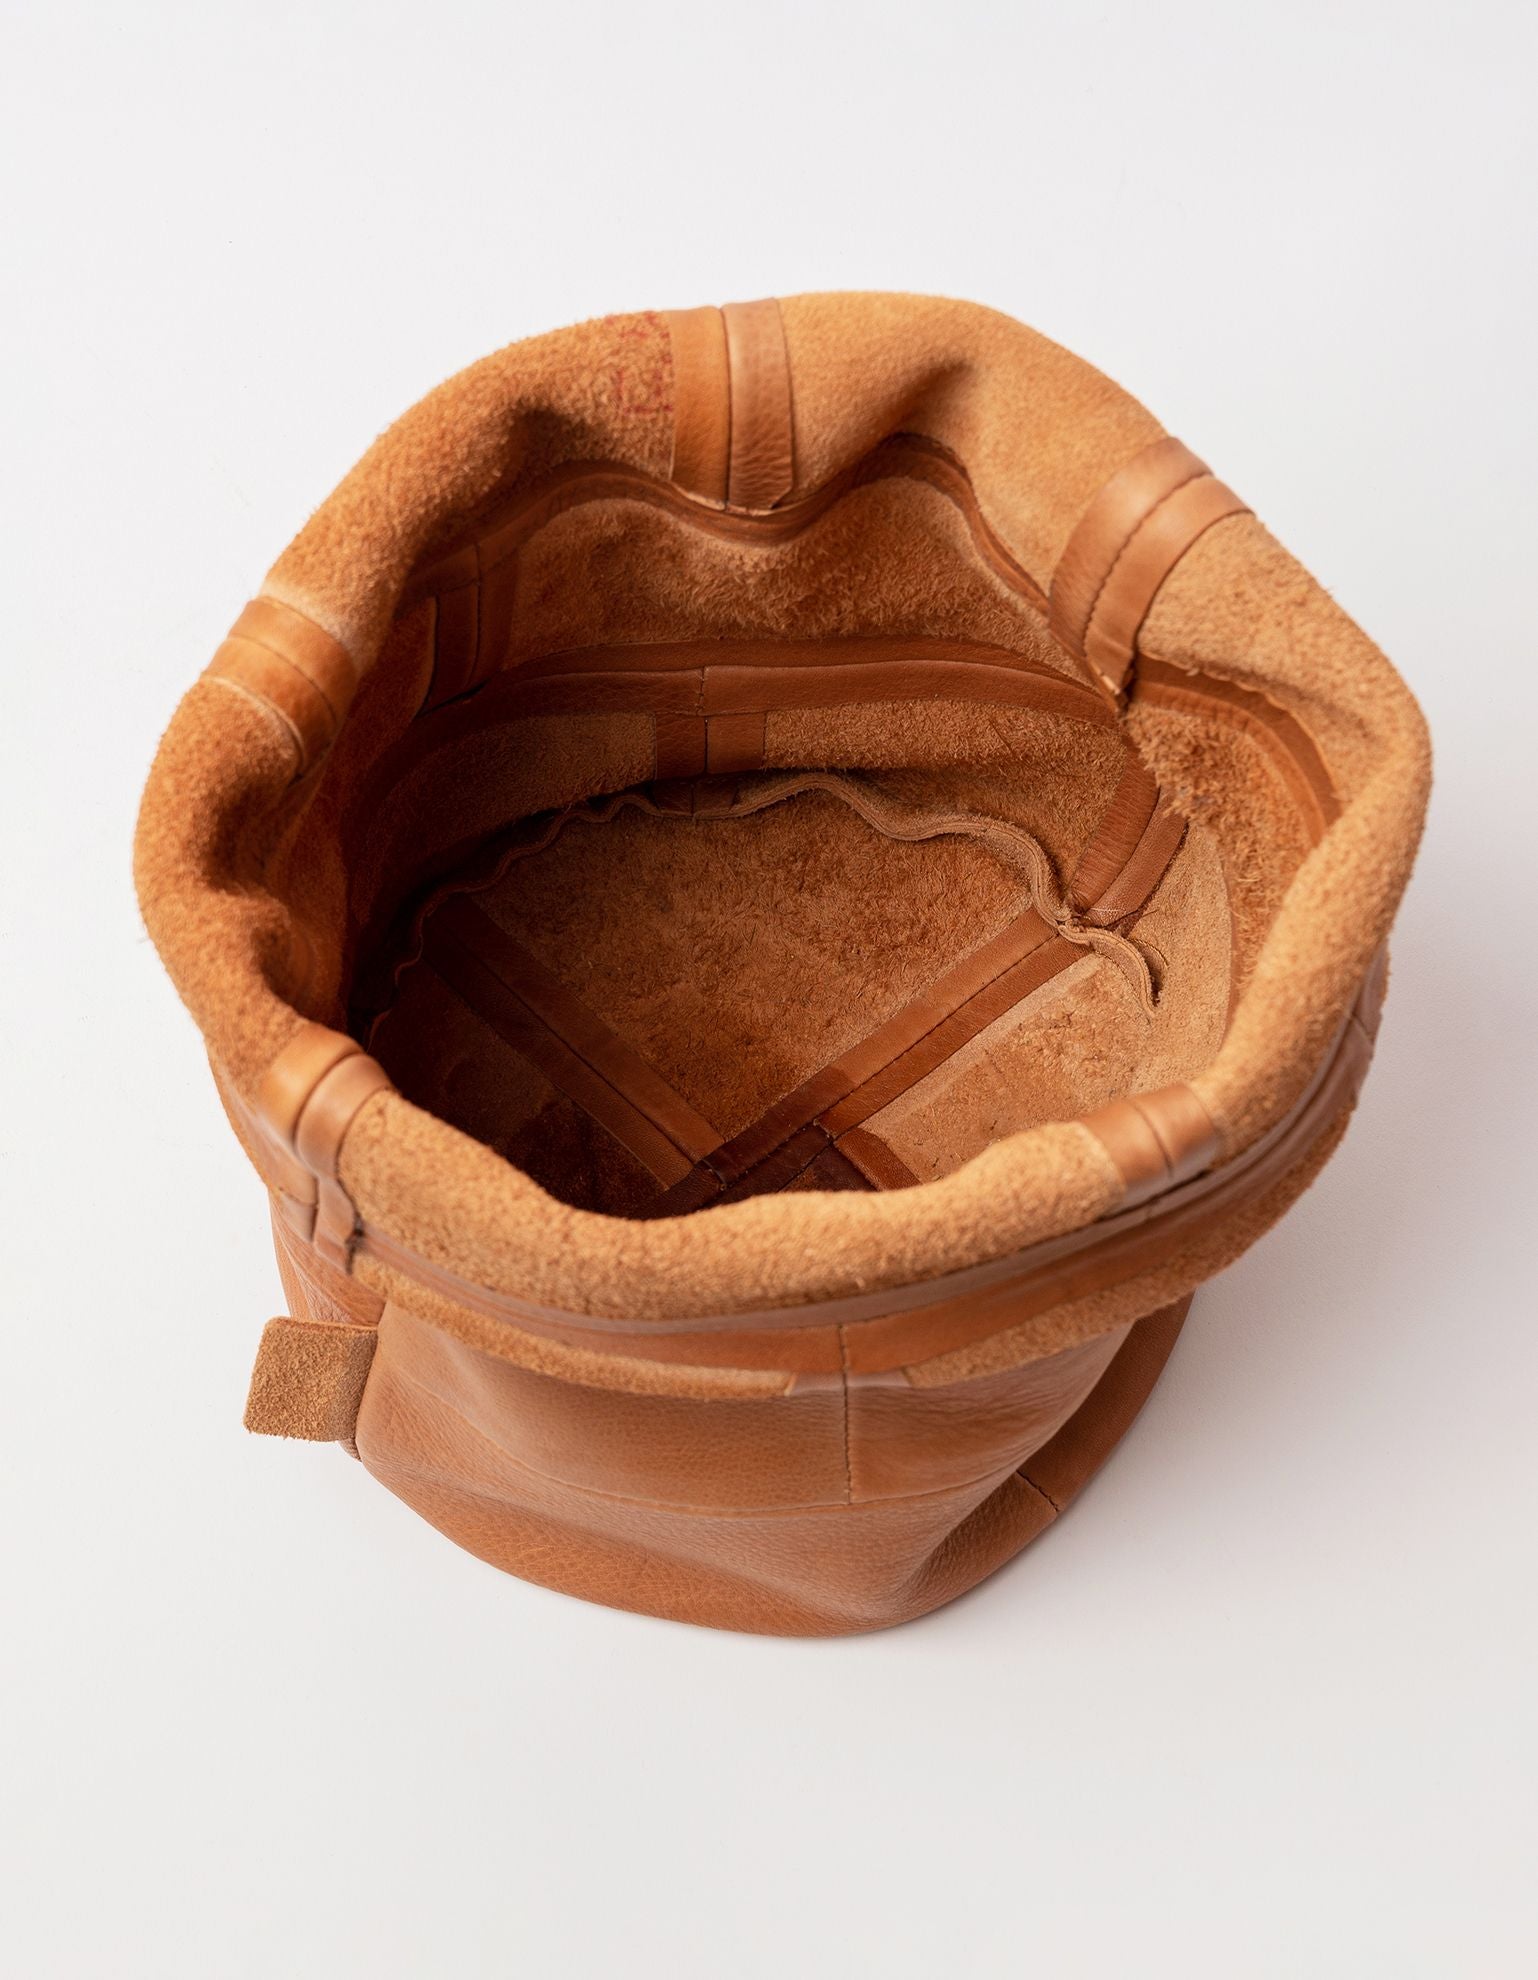 Leather Pot Wild Oak Soft Grain Leather. Round leather plant pot. Homeware by O My Bag. Inside product image